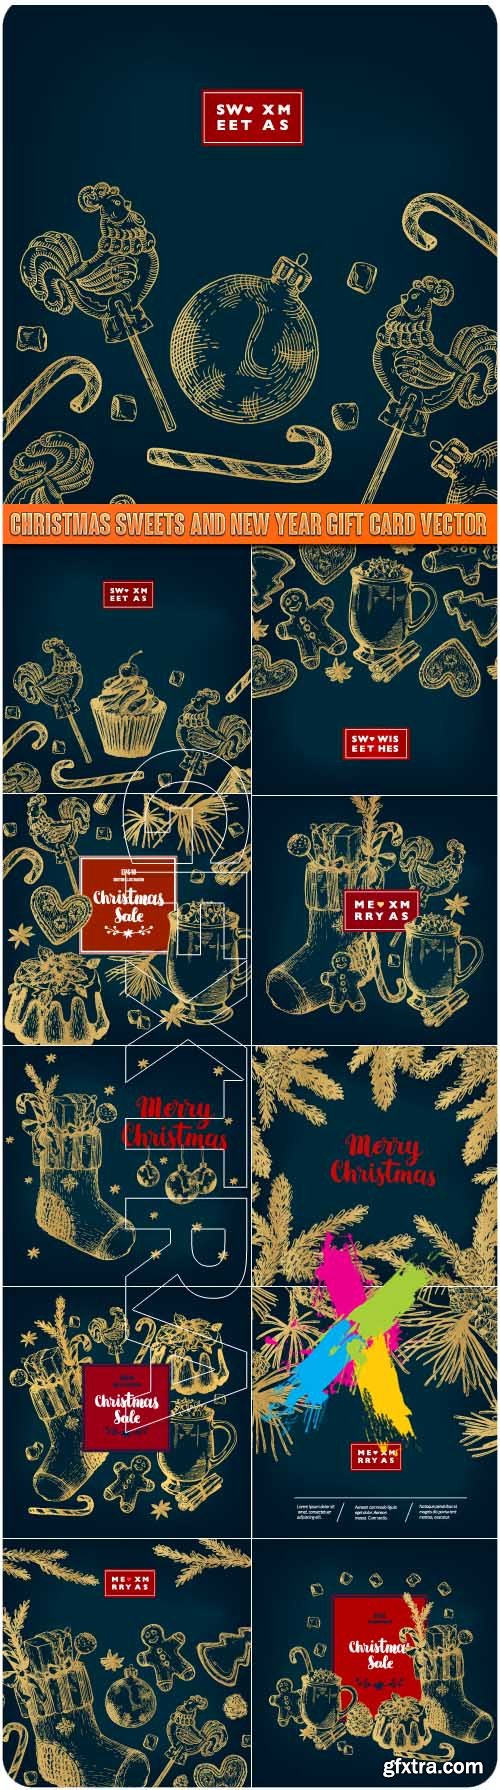 Christmas sweets and New Year gift card vector